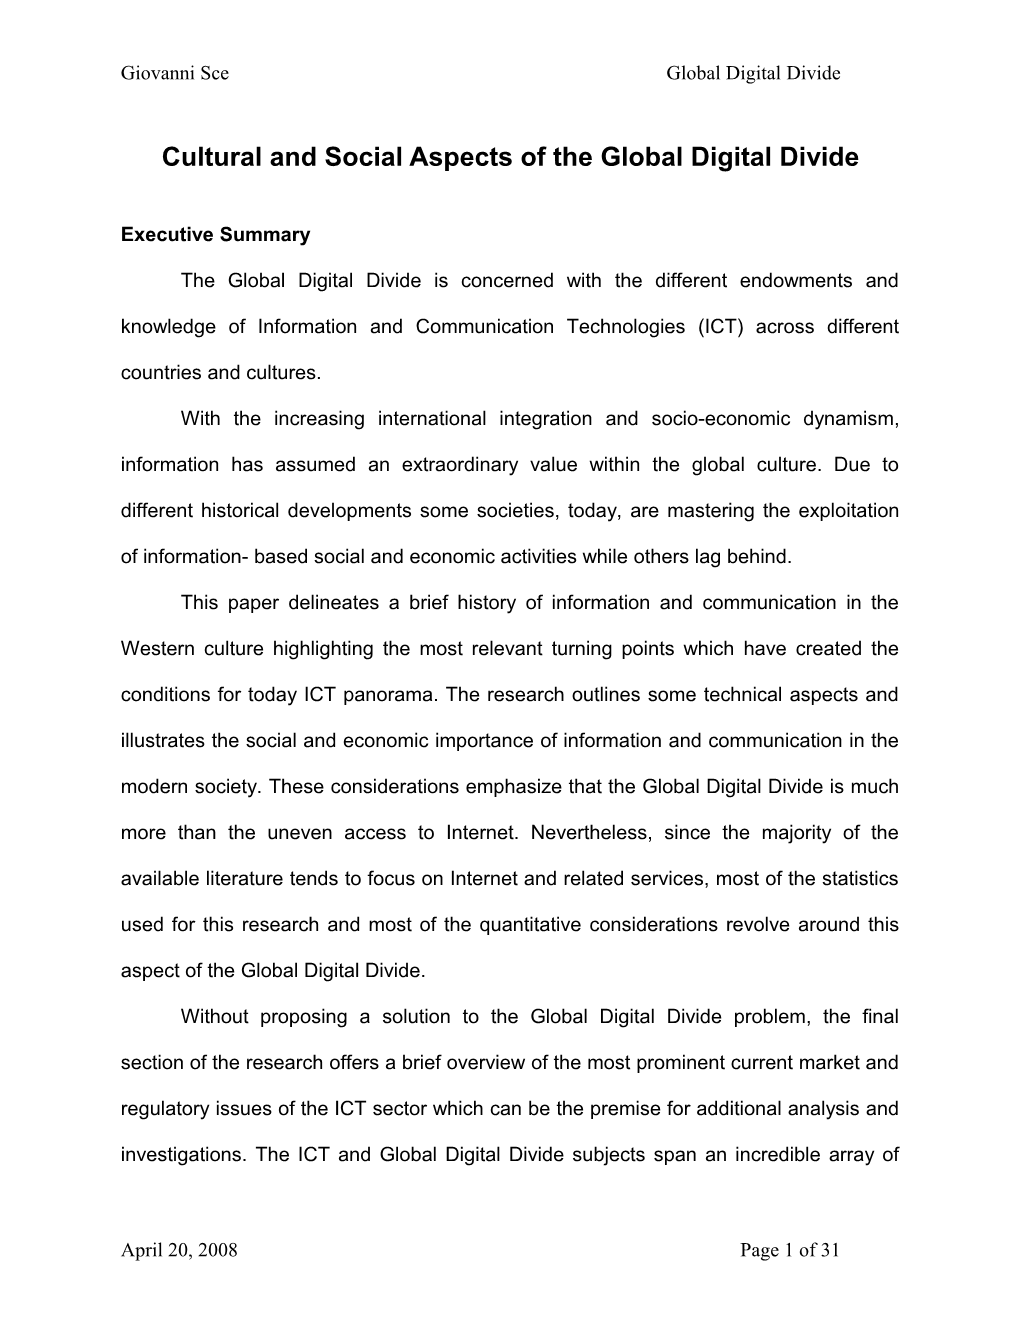 Cultural Aspects of the Global Digital Divide